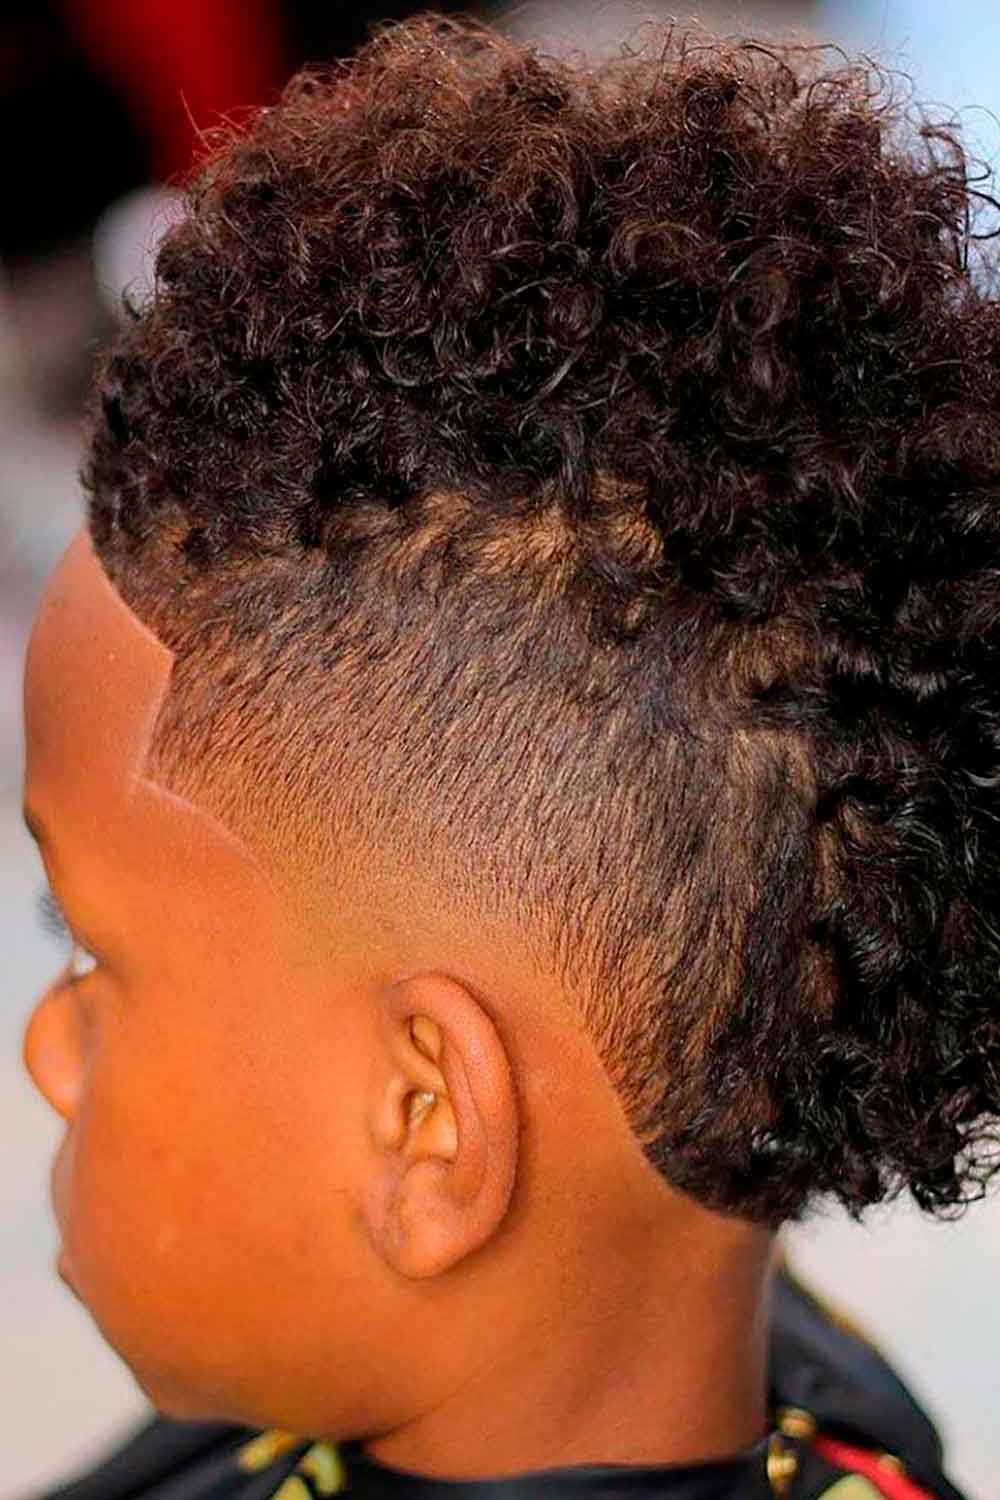 Curly Long Top And Shaved Sides